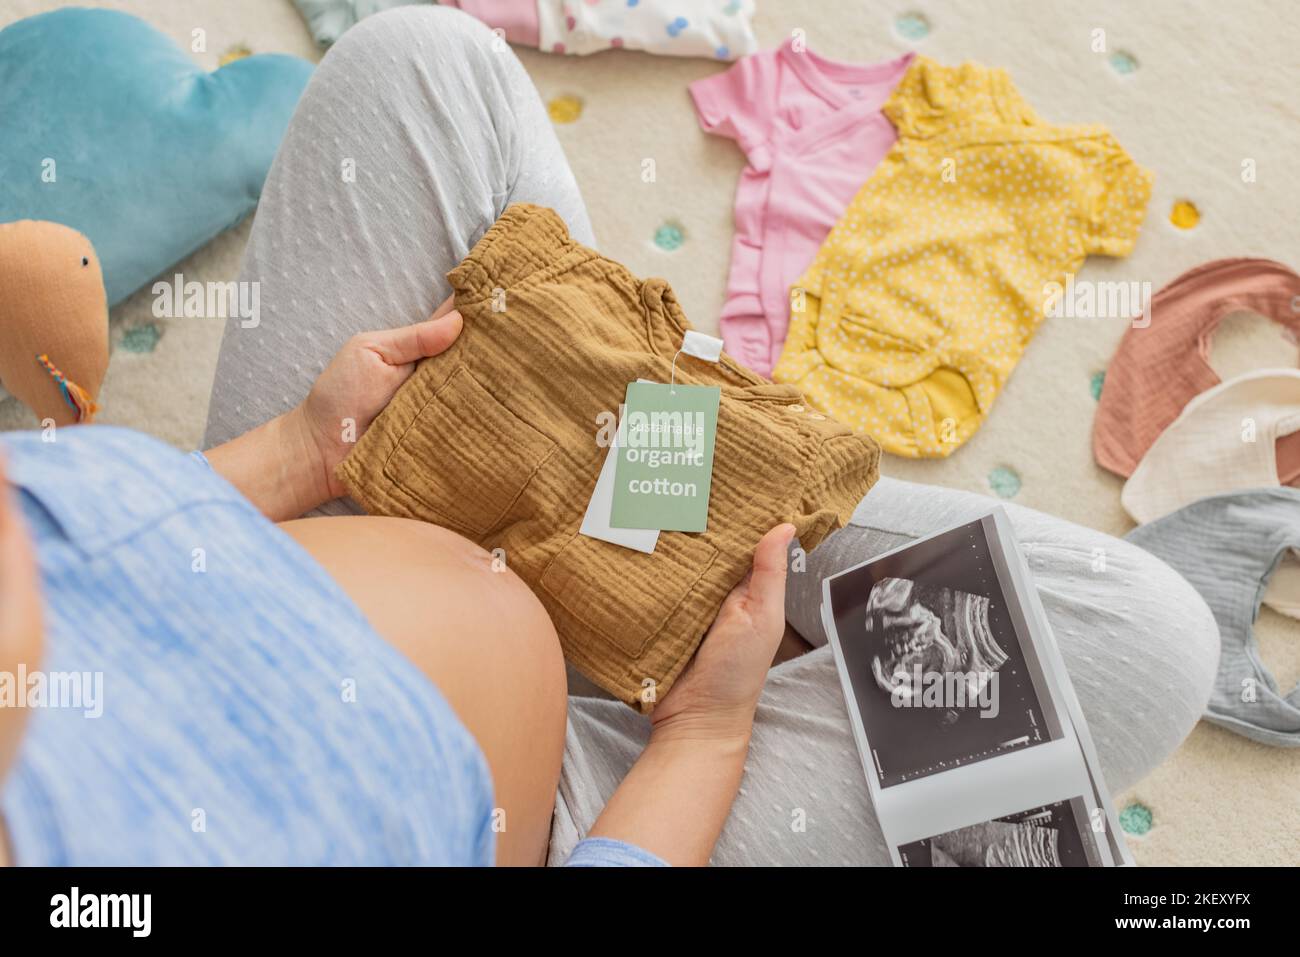 Baby clothing in organic cotton. Pregnant woman shopping sustainable healthy baby clothing during pregnancy. Woman showing pregnant belly baby bump Stock Photo